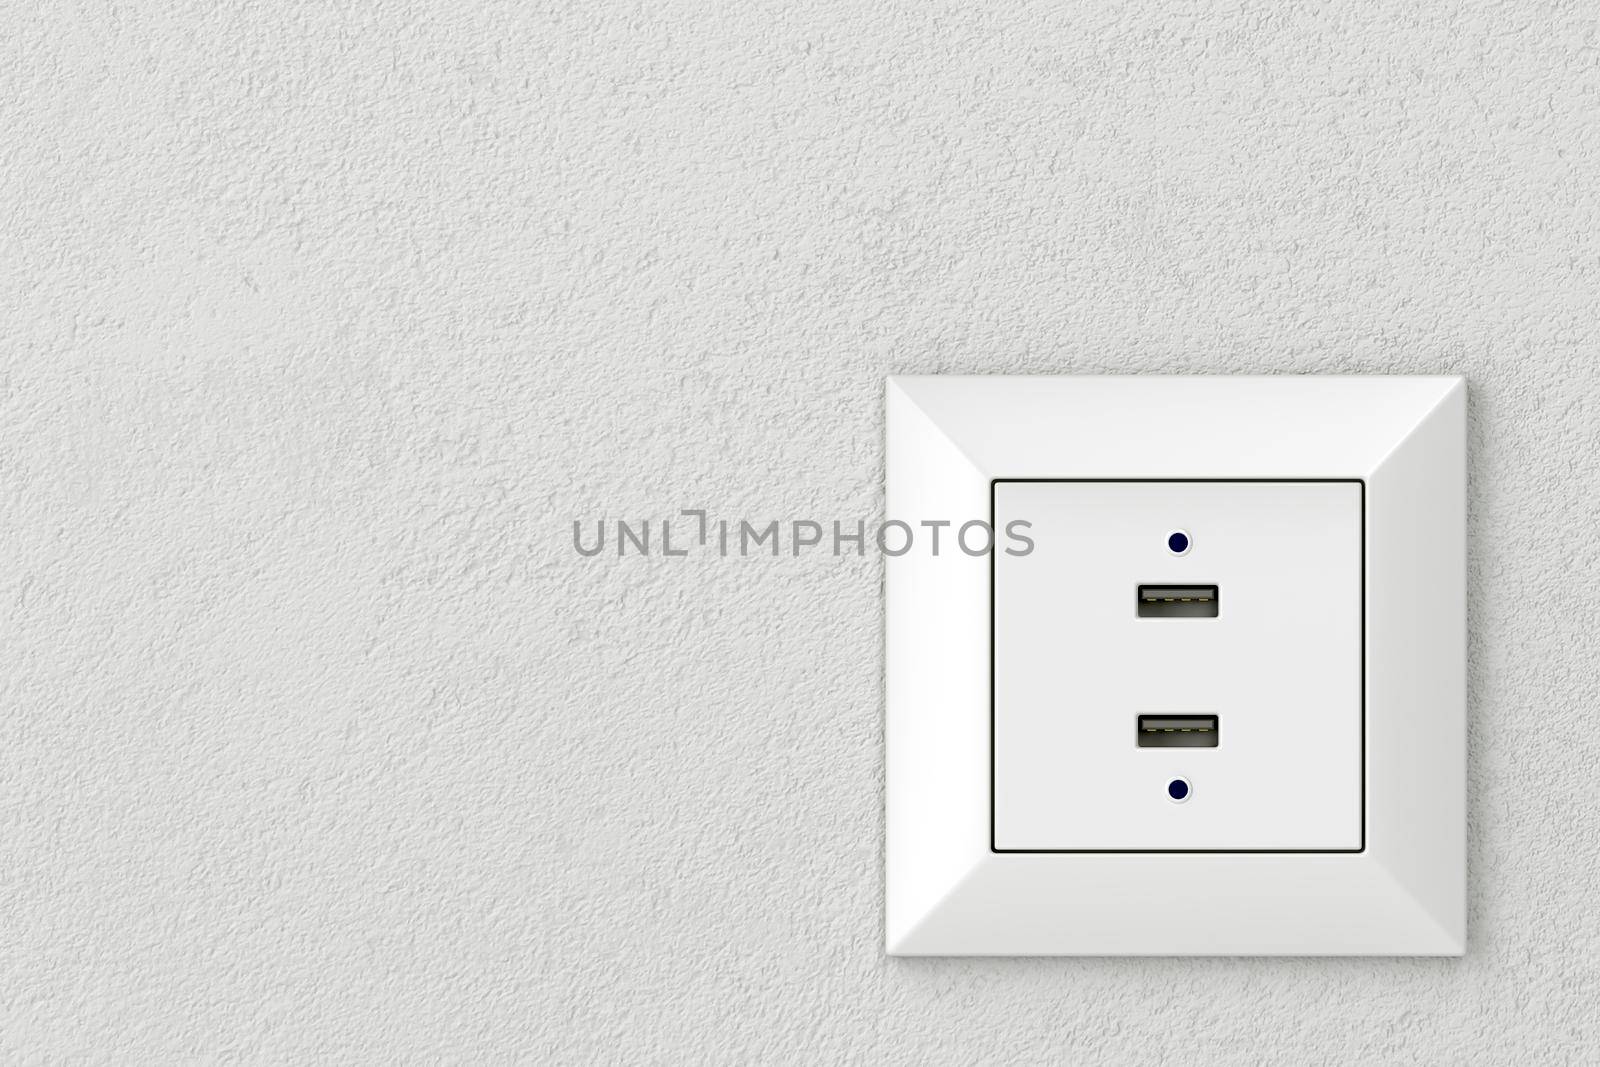 Wall socket with two USB charging ports